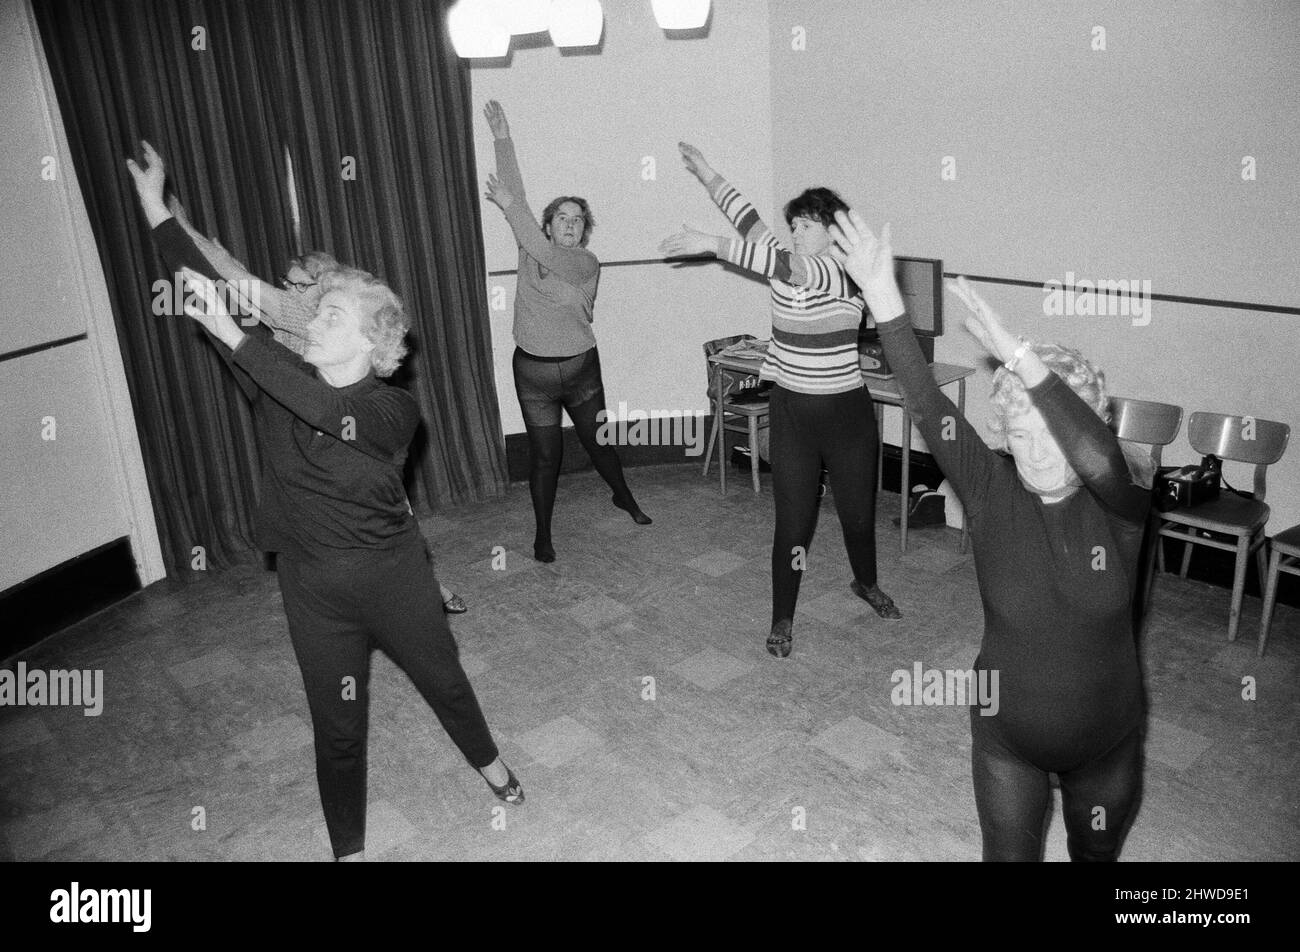 Cornwall's most amazing grandmother, Mrs Mary Wyatt (75 next April) dances her way into the new decade of the 1970s, clad in black dancing tights showing a class of women how to do energetic and athletic arm and leg stretches to music. Mrs Wyatt held her first Keep Fit class of the 1970s at the Community Rooms at the Guildhall in St Ives, Cornwall. 2nd January 1970.Cornwall's most amazing grandmother, Mrs Mary Wyatt (75 next April) dances her way into the new decade of the 1970s, clad in black dancing tights showing a class of women how to do energetic and athletic arm and leg stretches to mus Stock Photo